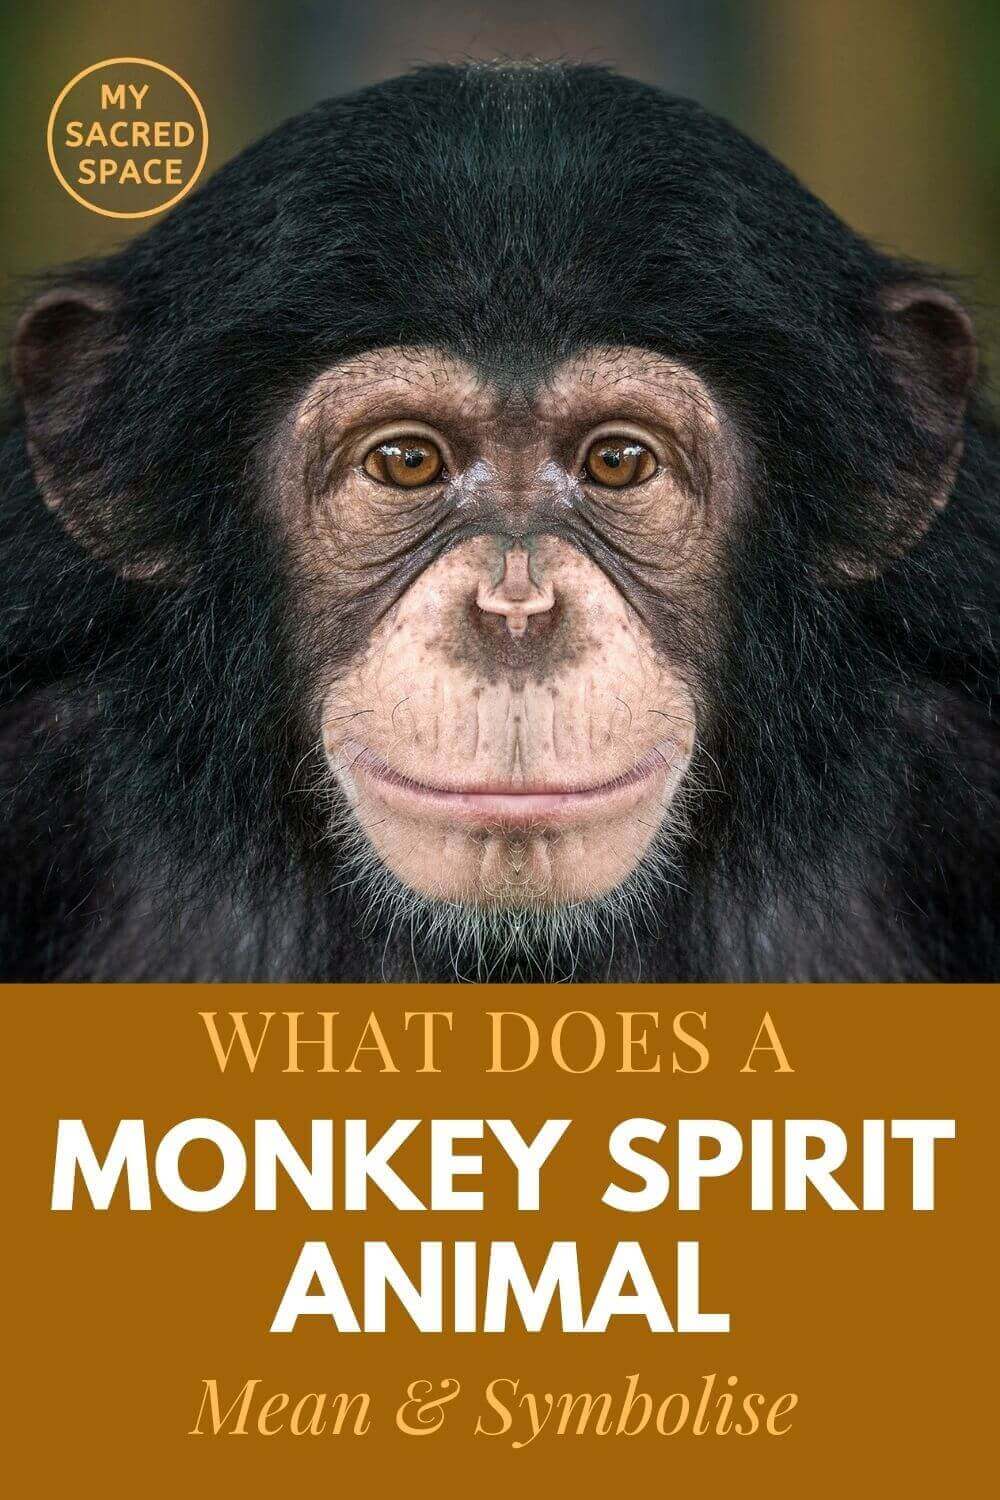 what does a monkey spirit animal mean and symbolise